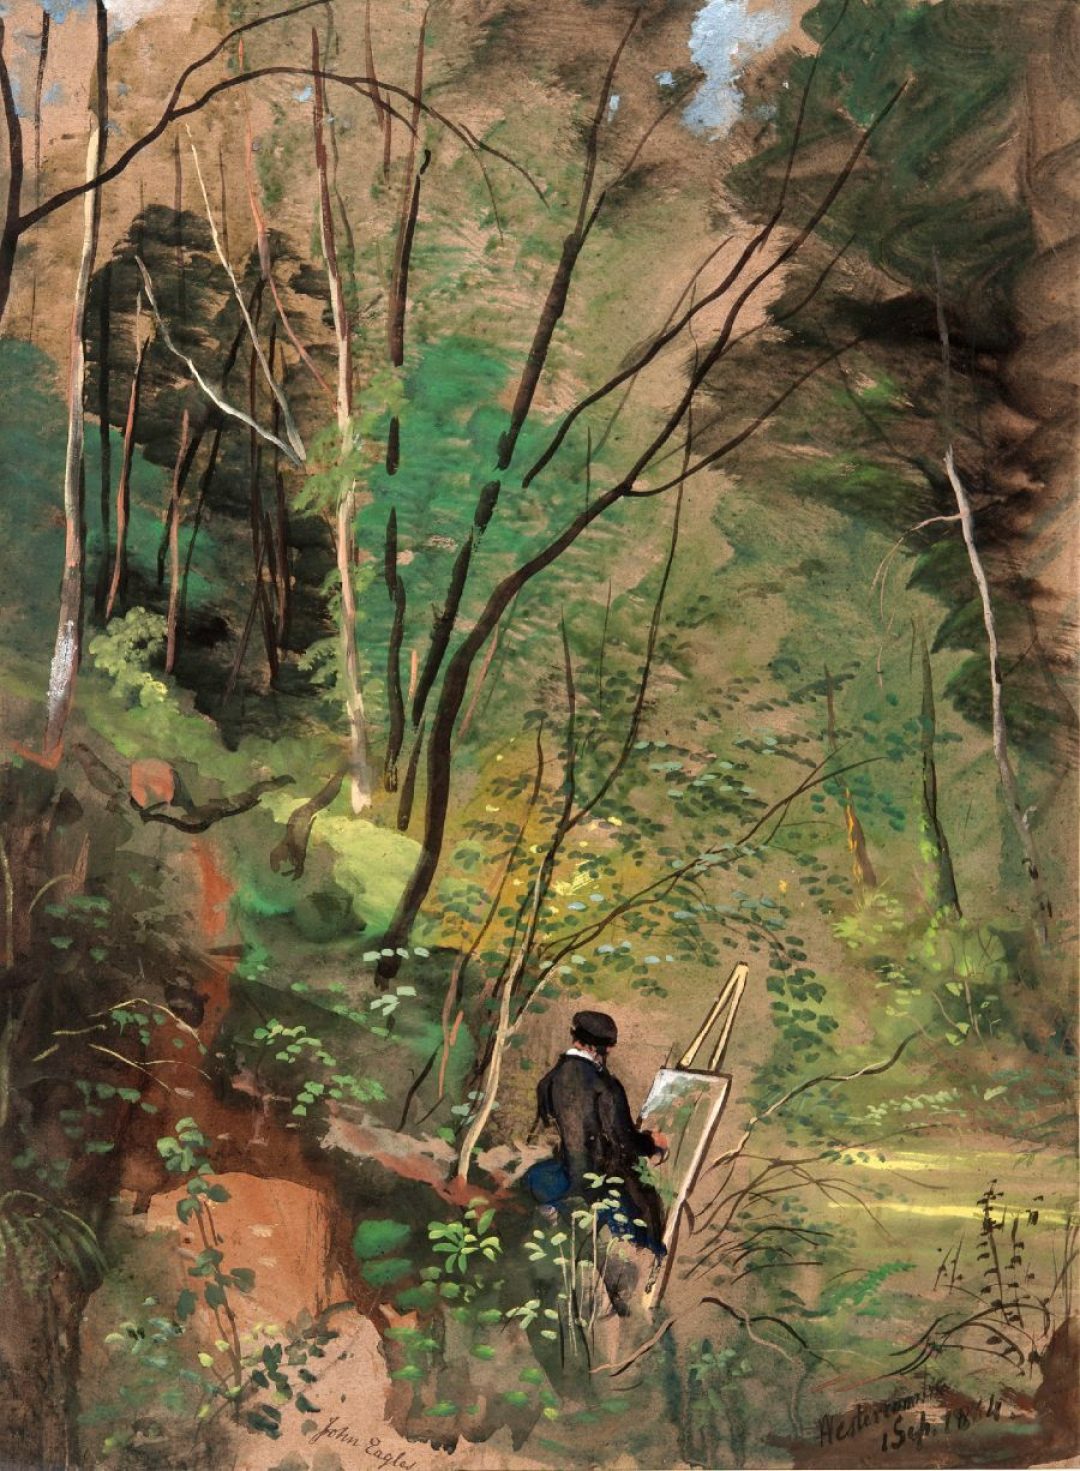 CWB 2 24c Artist Sketching at Hestercombe by J Eagles 1834 web